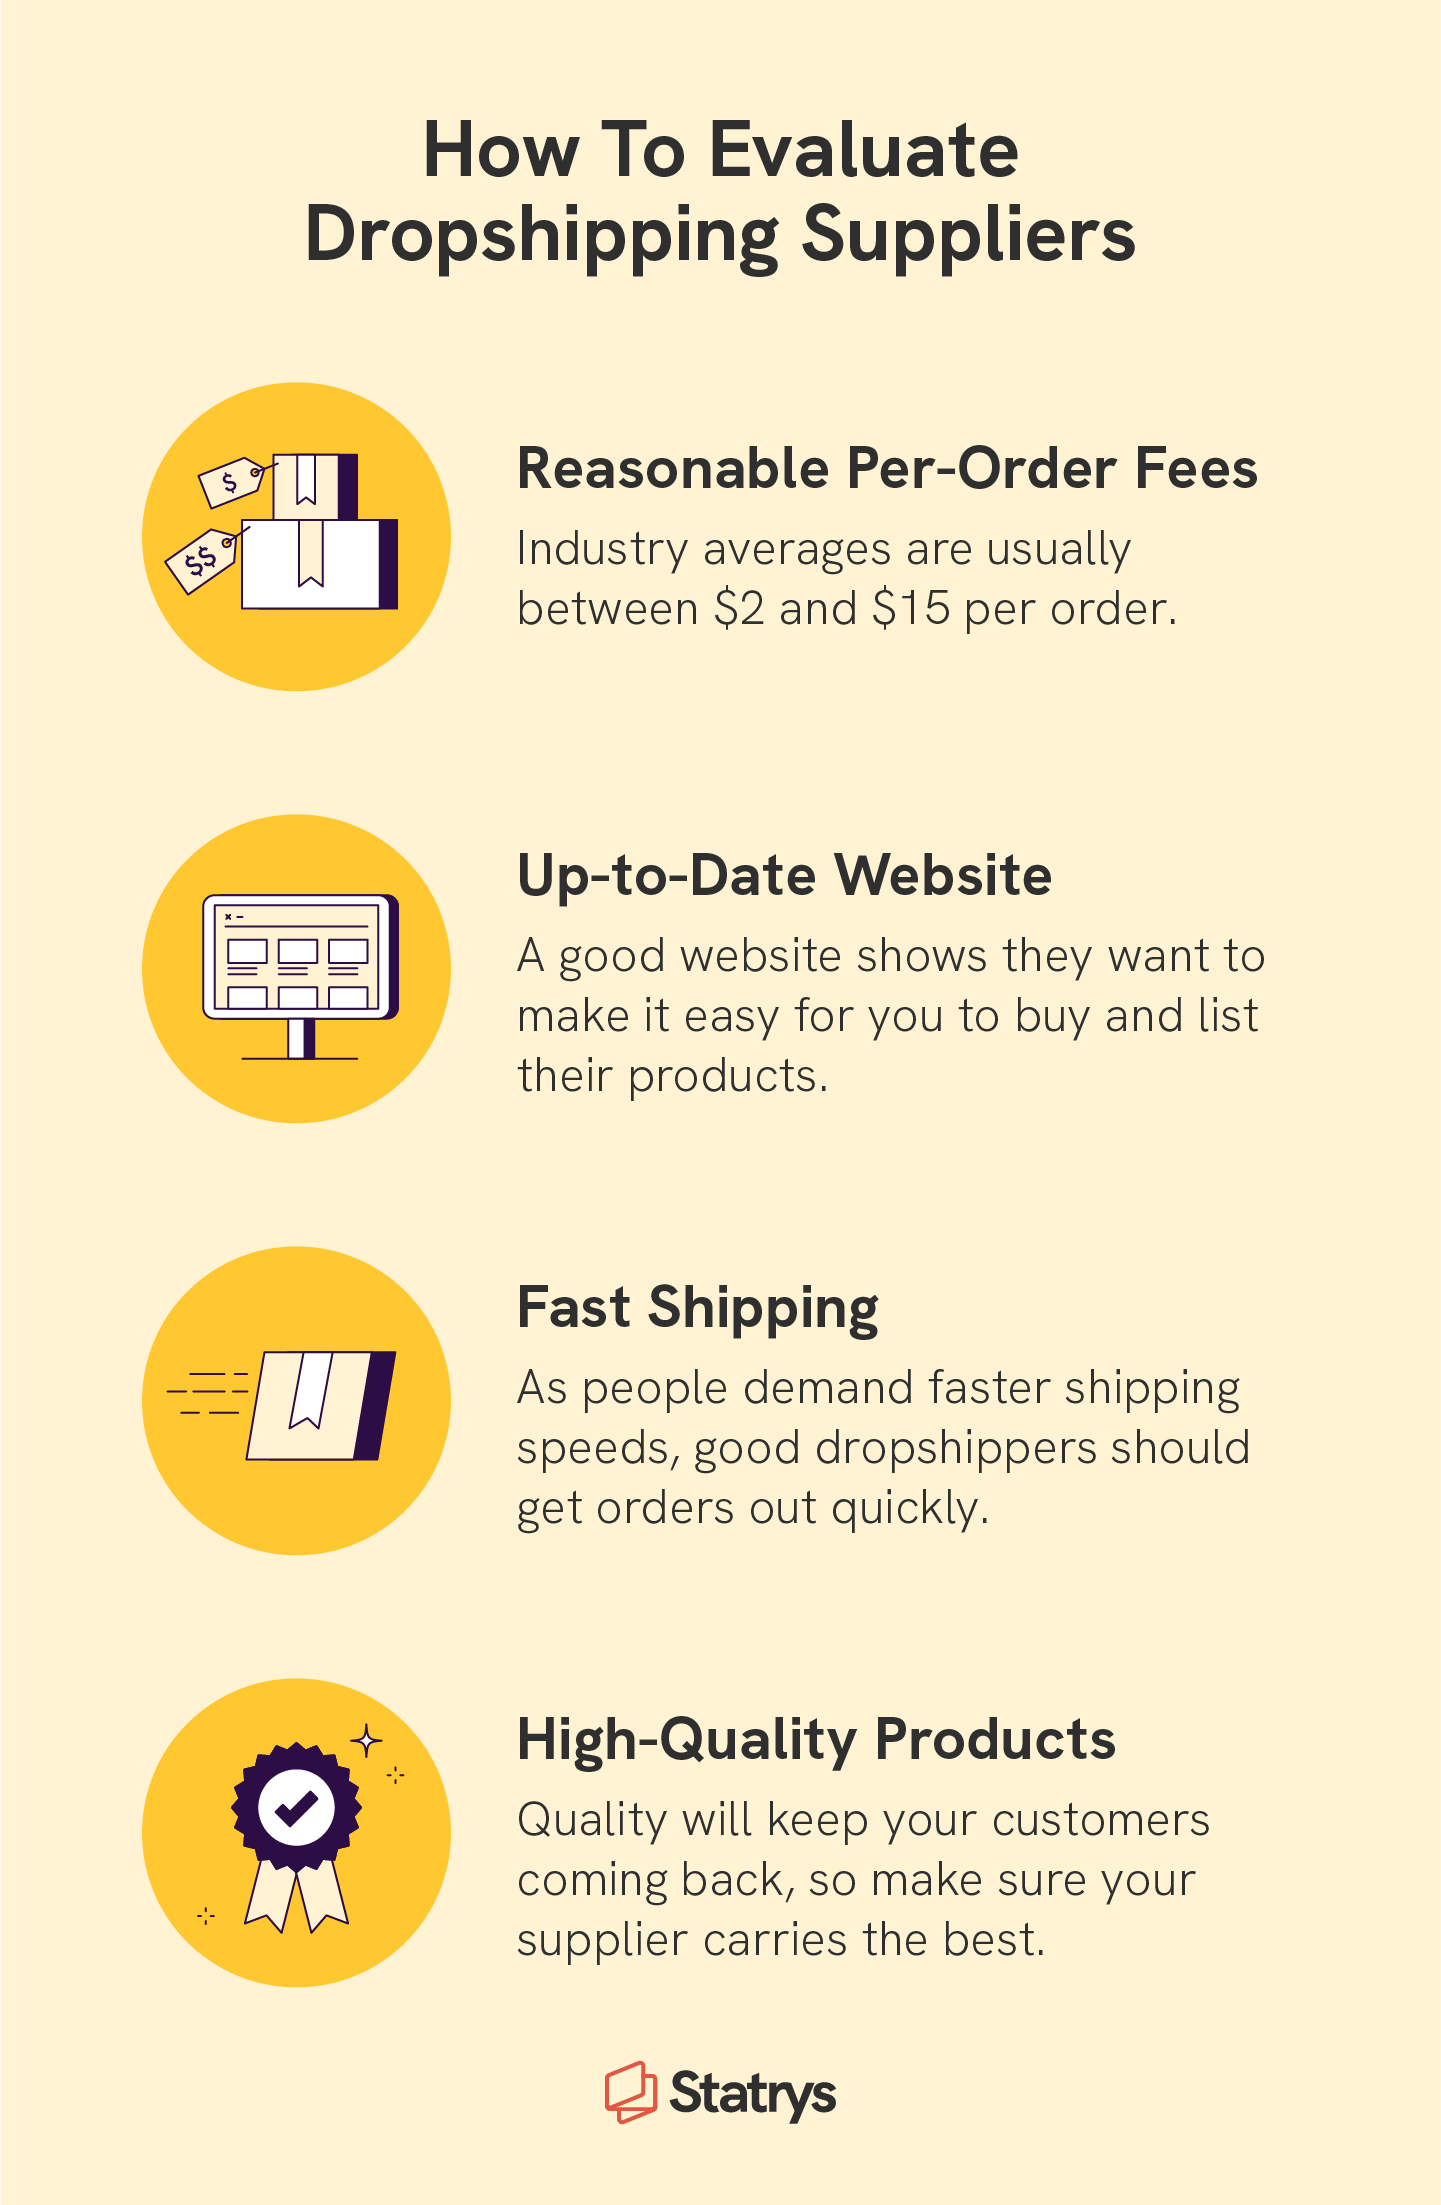 Icons of boxes, a website, a box in transit, and a ribbon underscore how to evaluate dropshipping suppliers for per-order fees, an up-to-date website, fast shipping, and high-quality products.